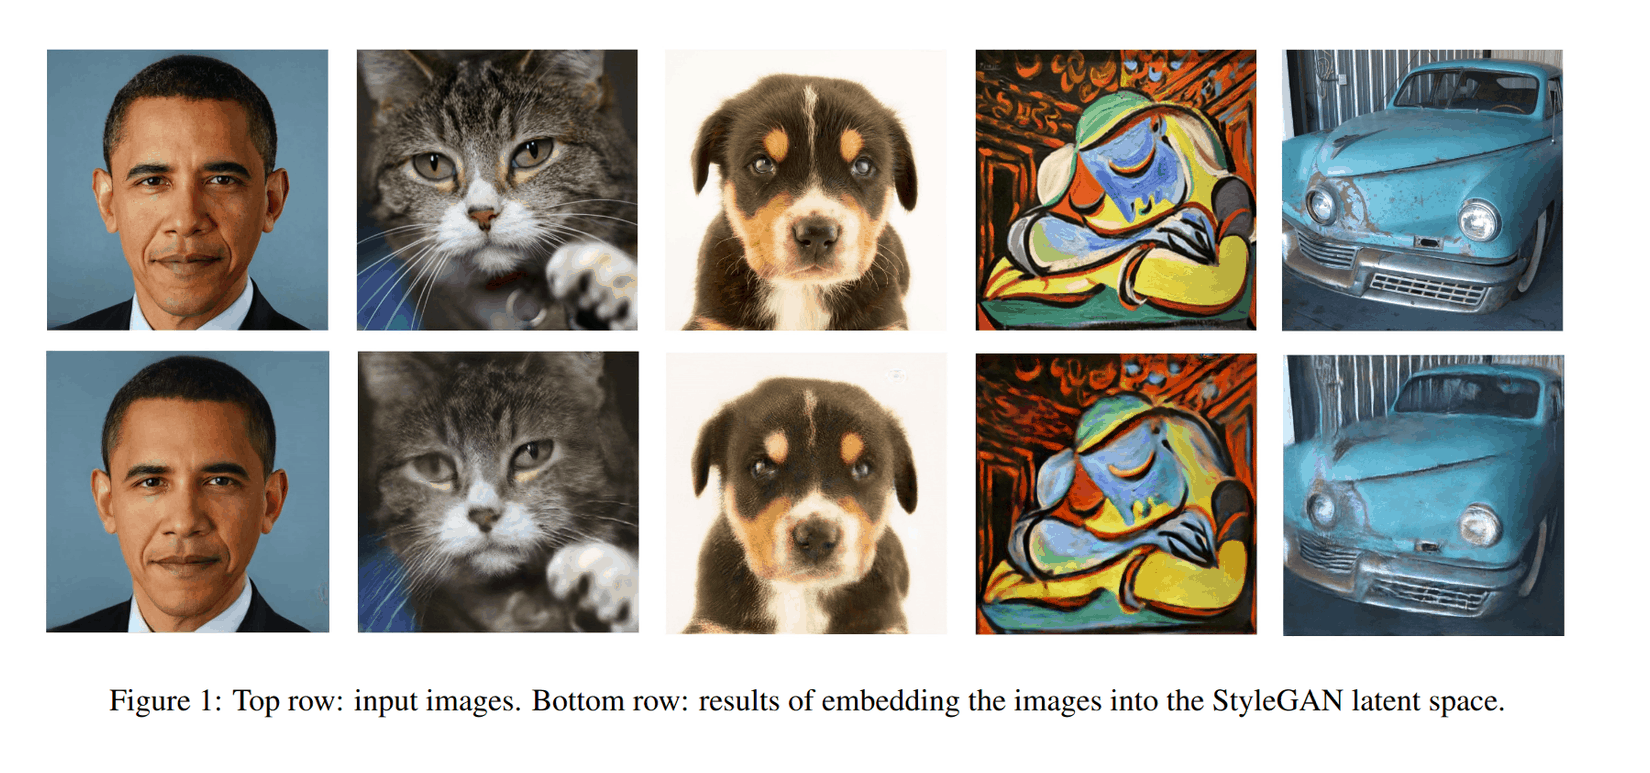 Figure 1: Top row: input images. Bottom row: results of embedding the images into the StyleGAN latent space.